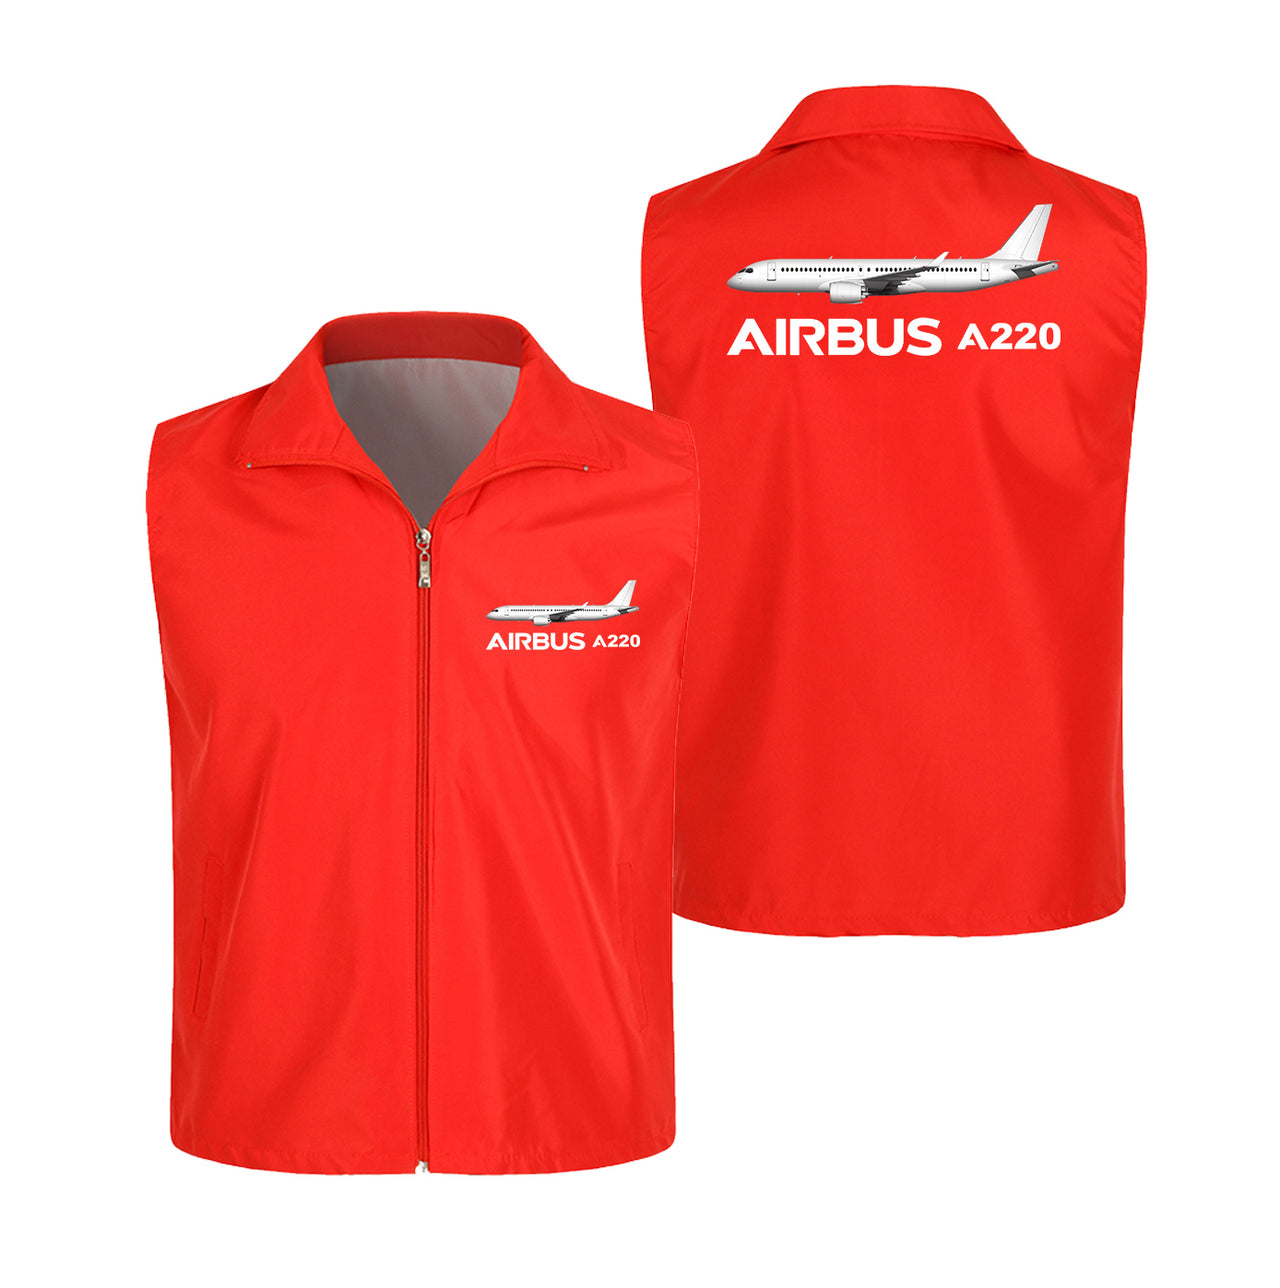 The Airbus A220 Designed Thin Style Vests